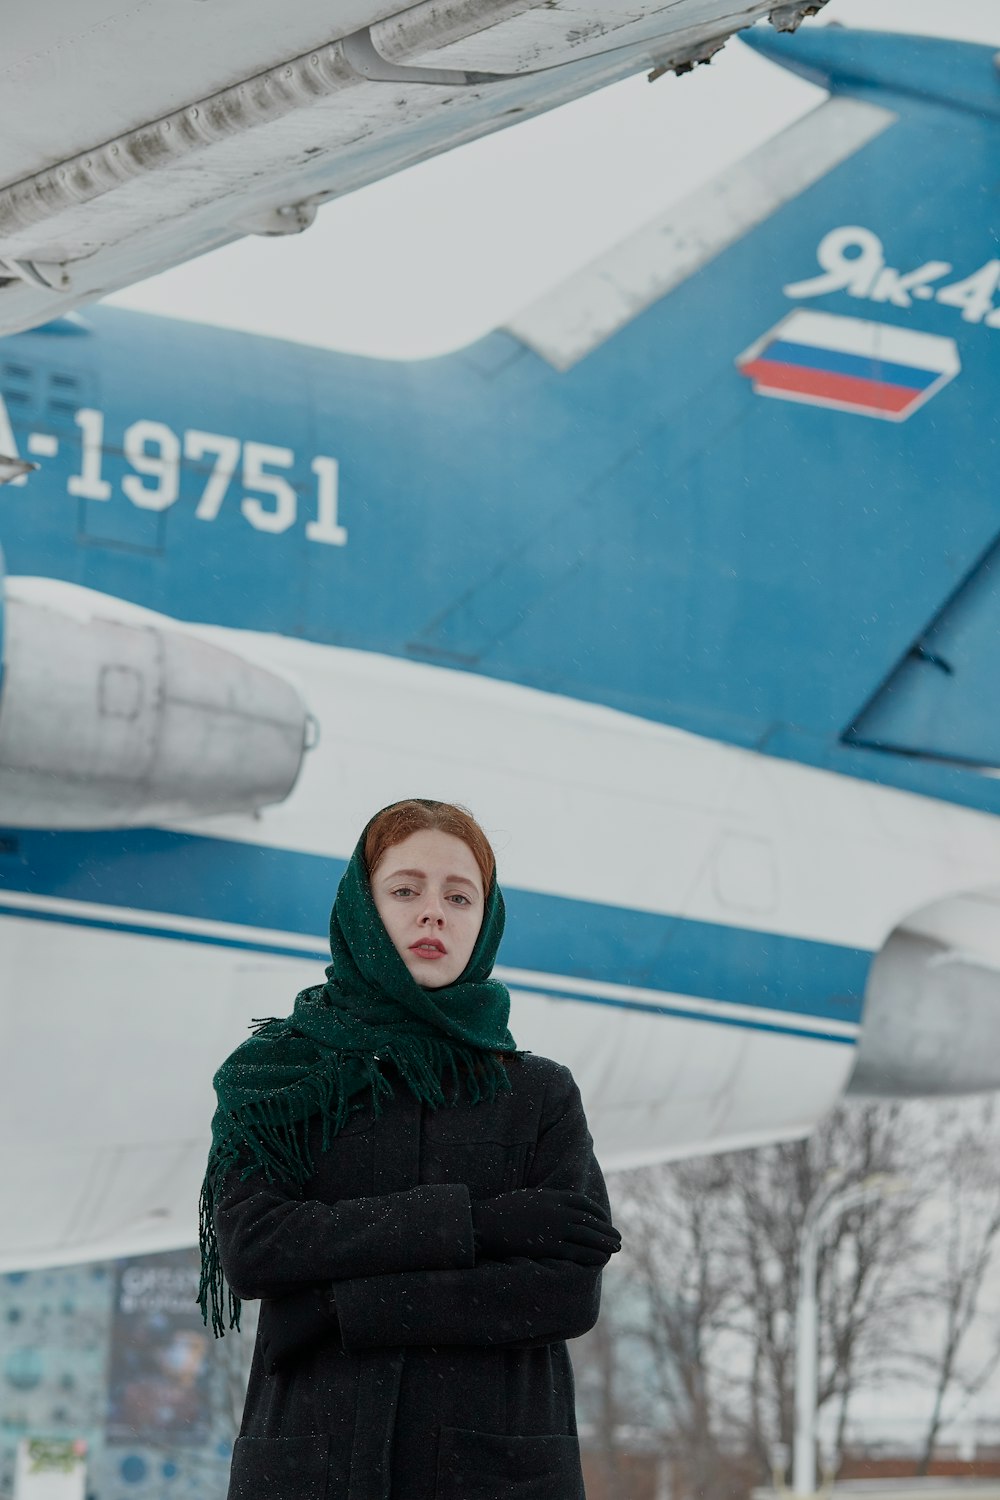 woman in black jacket standing near white airplane